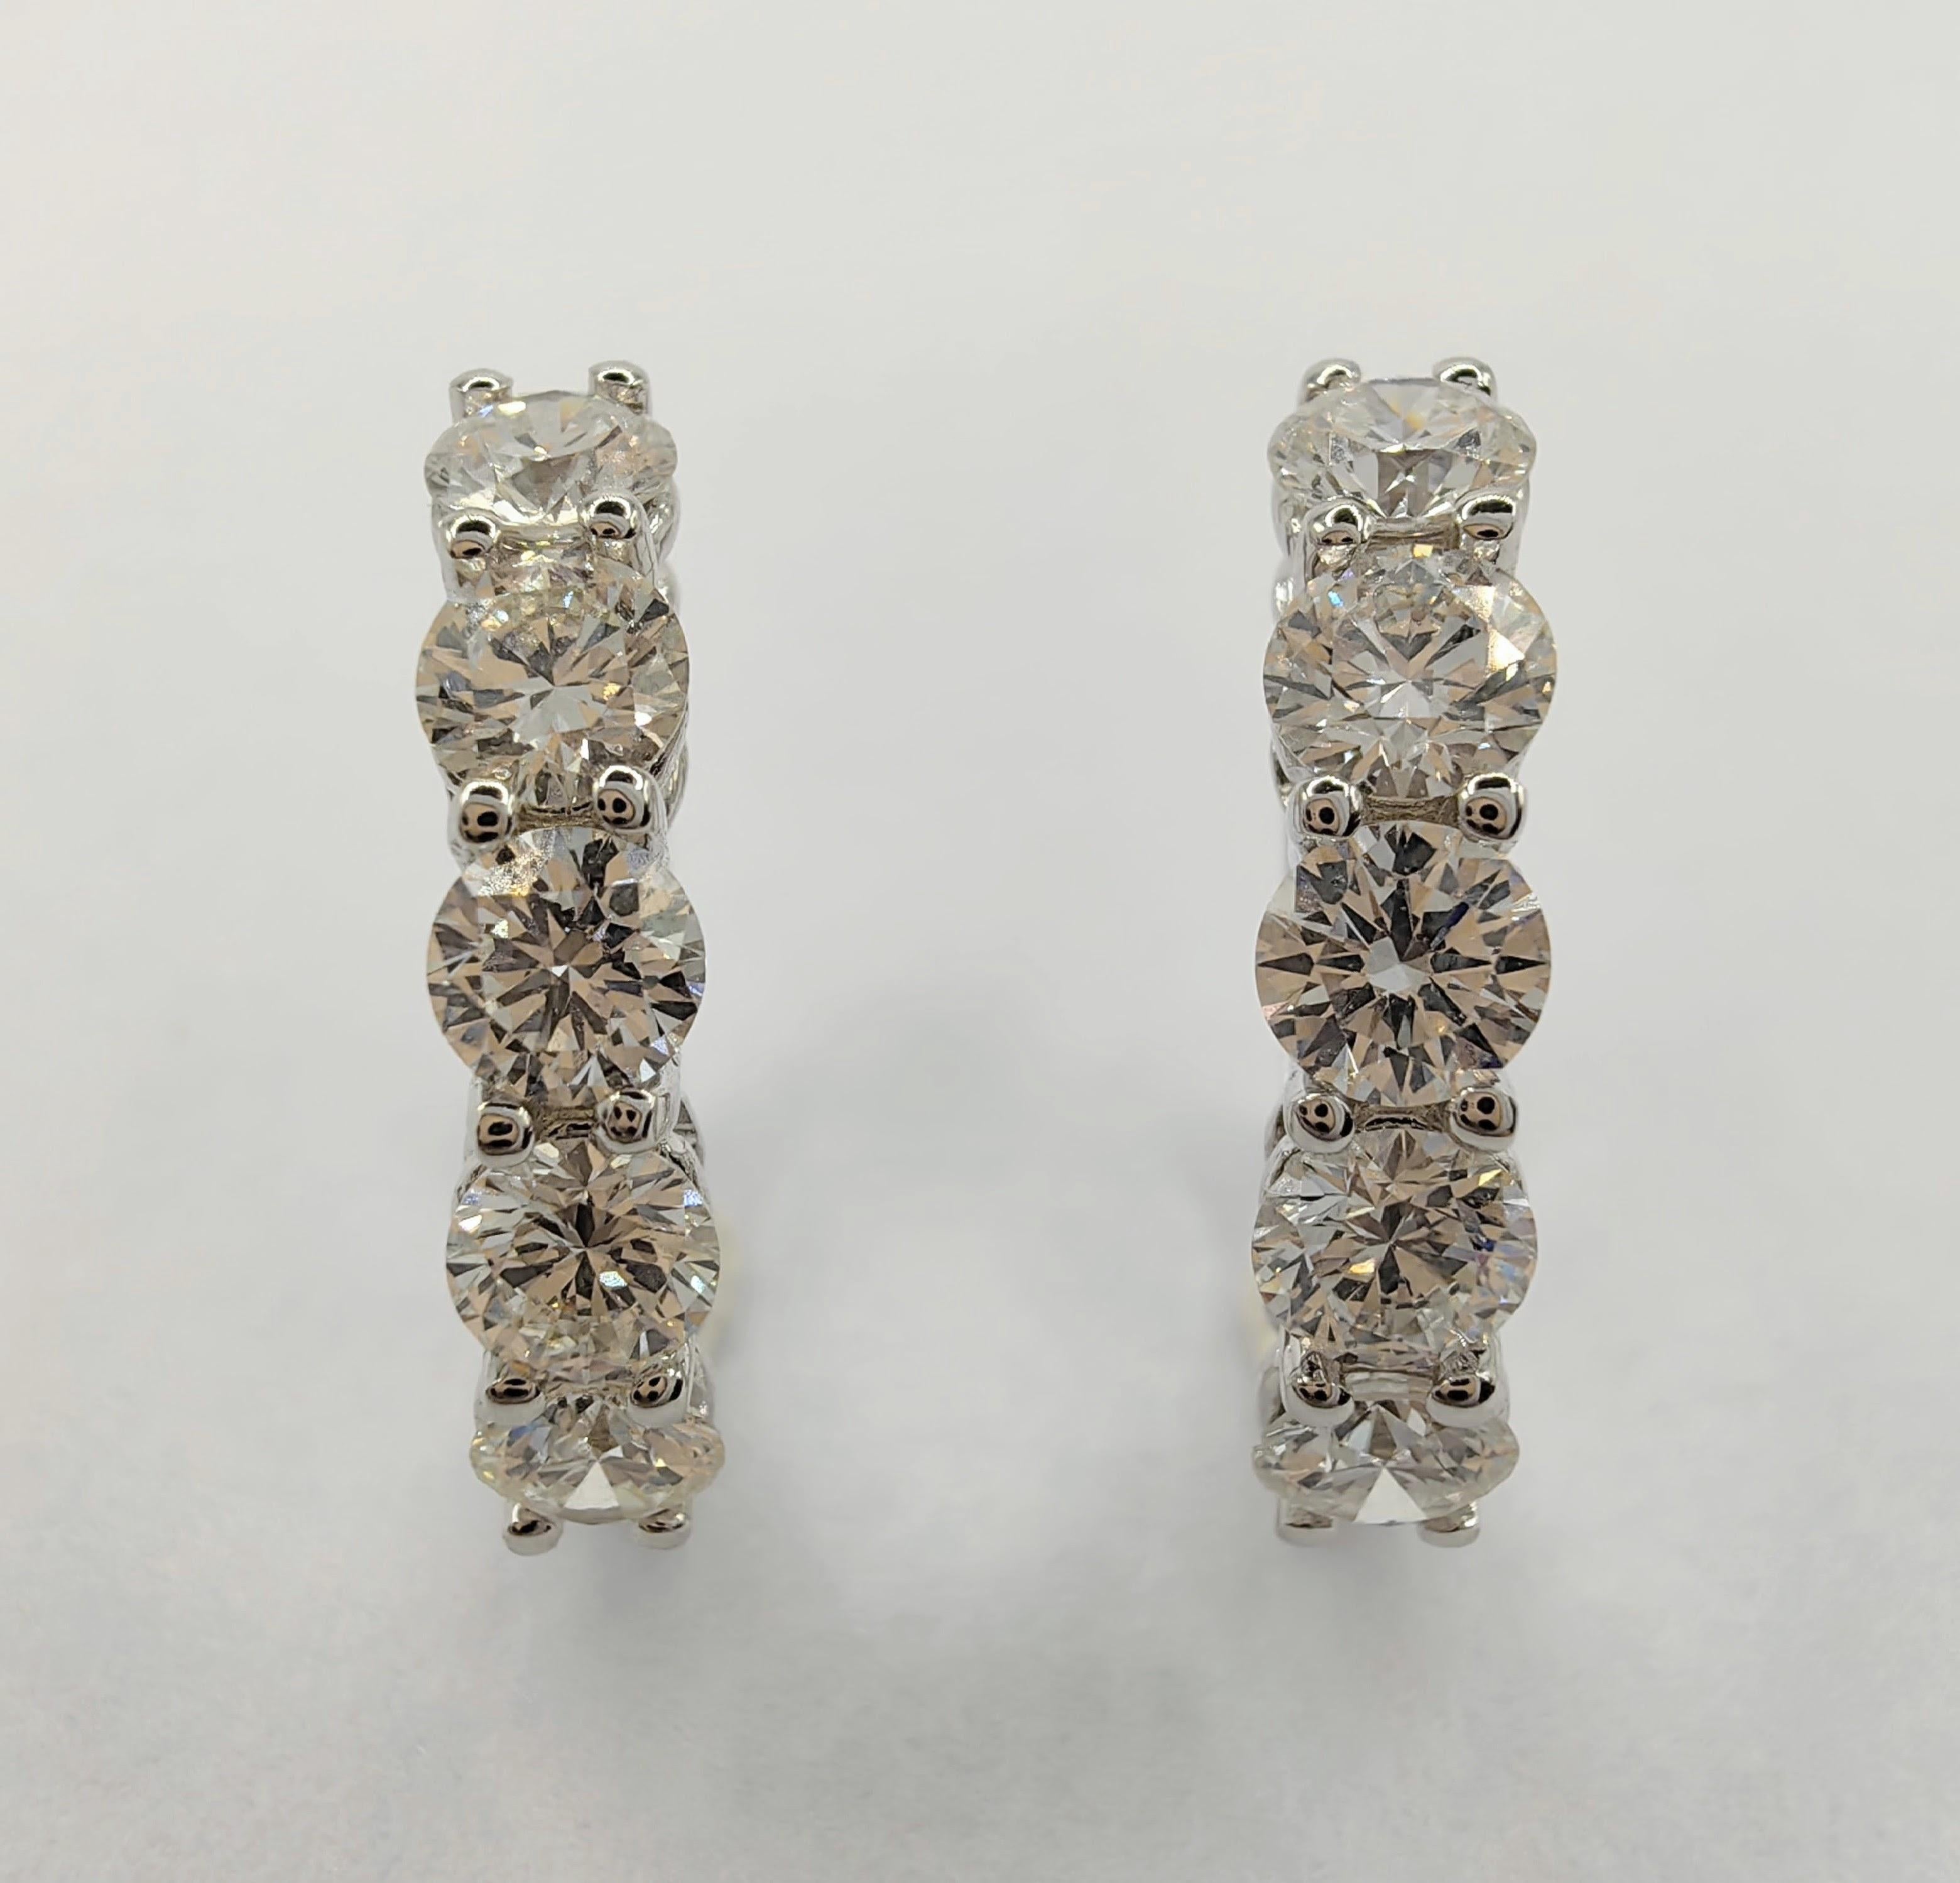 Introducing our elegant 1 Carat 10-Diamond Huggies Hoop Earrings in 18K White Gold. These exquisite earrings are adorned with a total of 10 round-cut diamonds, totaling 1 carat in weight. The diamonds boast a G color grade and VS clarity, ensuring